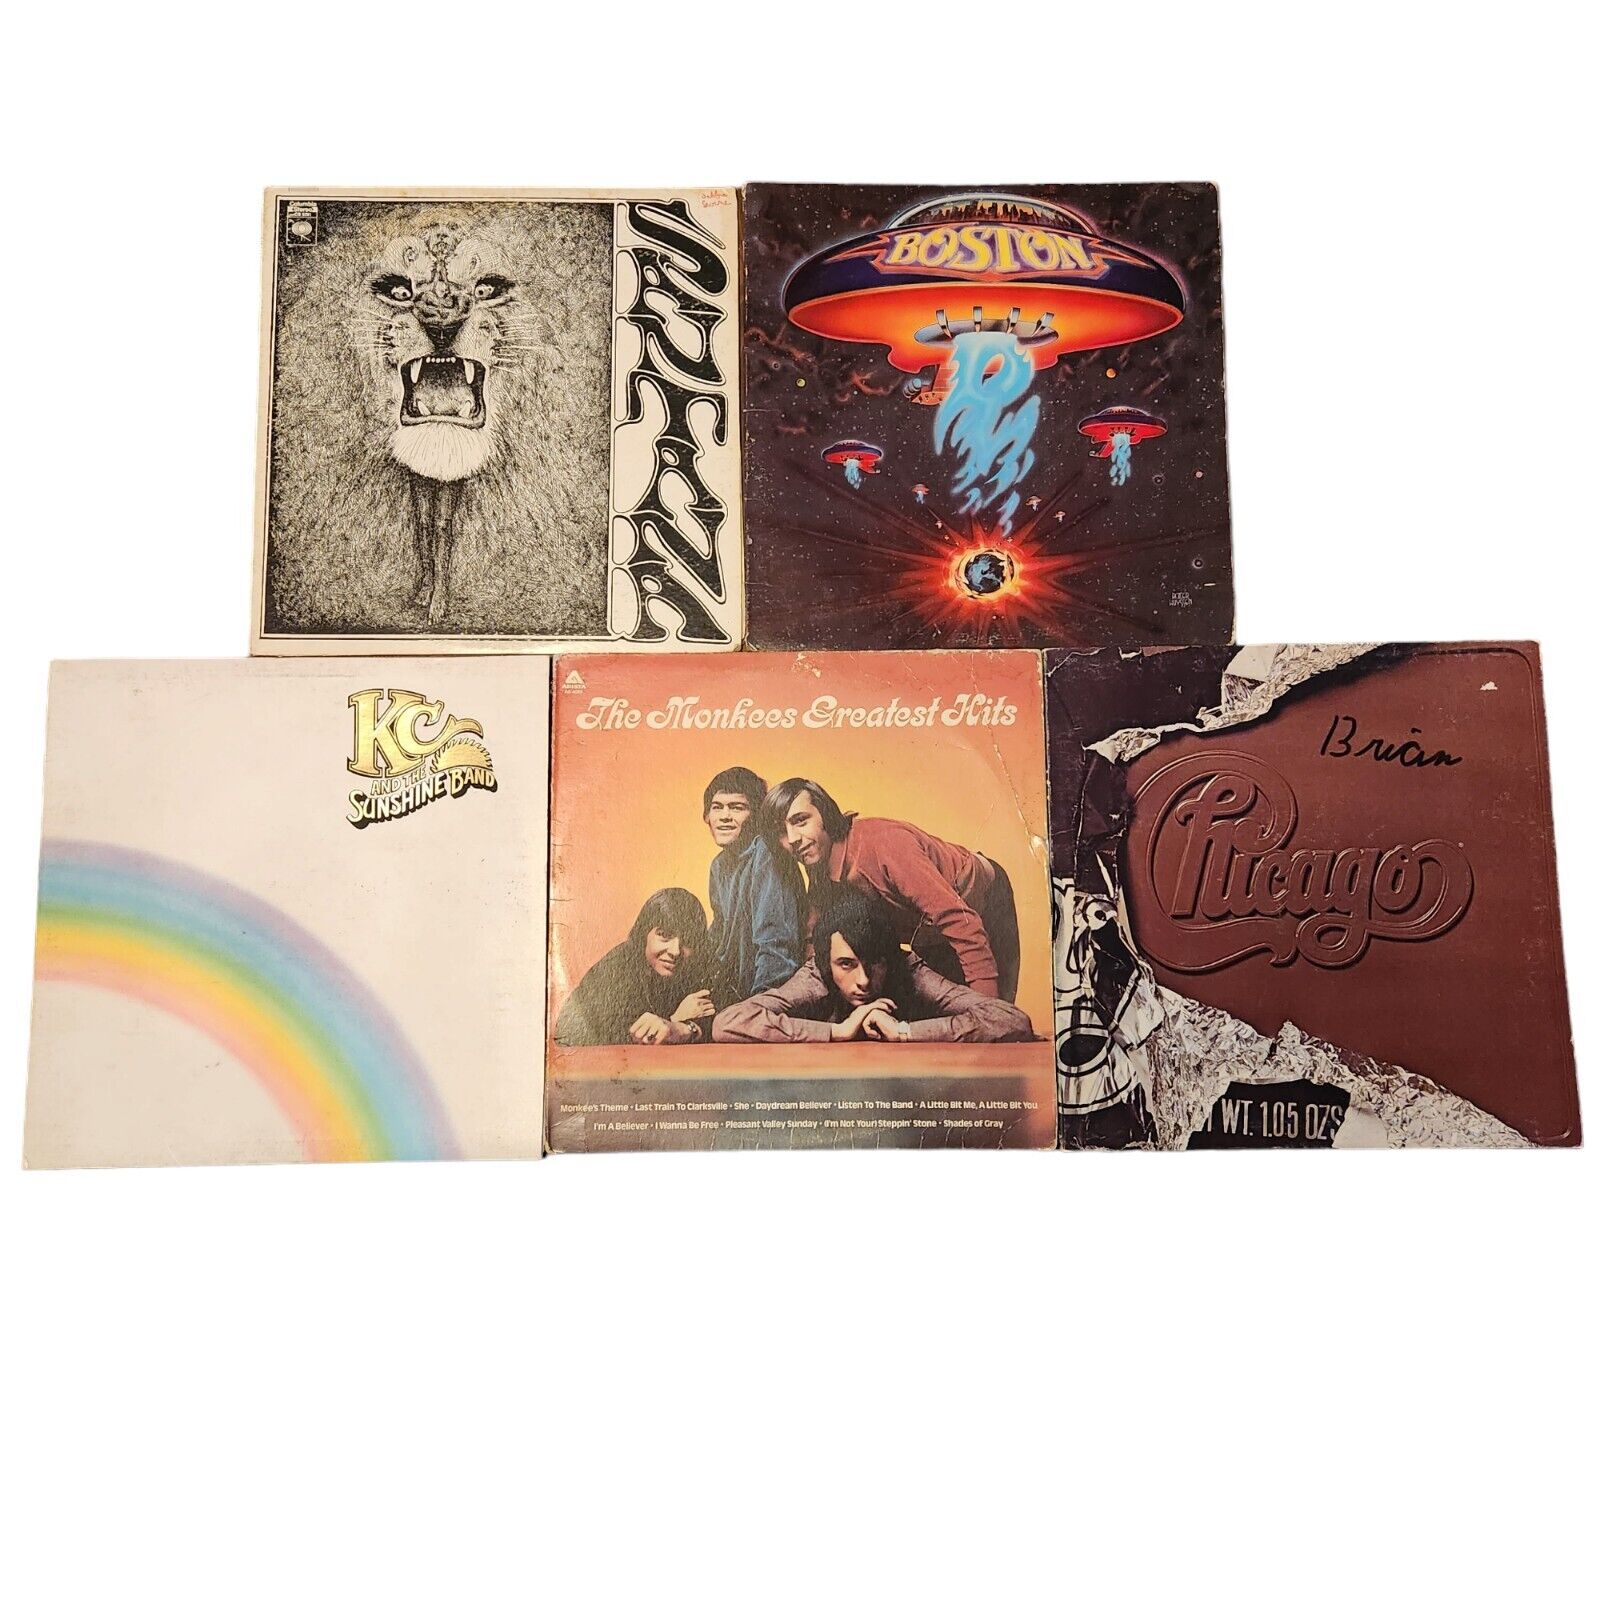 5 Vtg Vinyl Record Albums Santana, Chicago, Boston And More All Untested